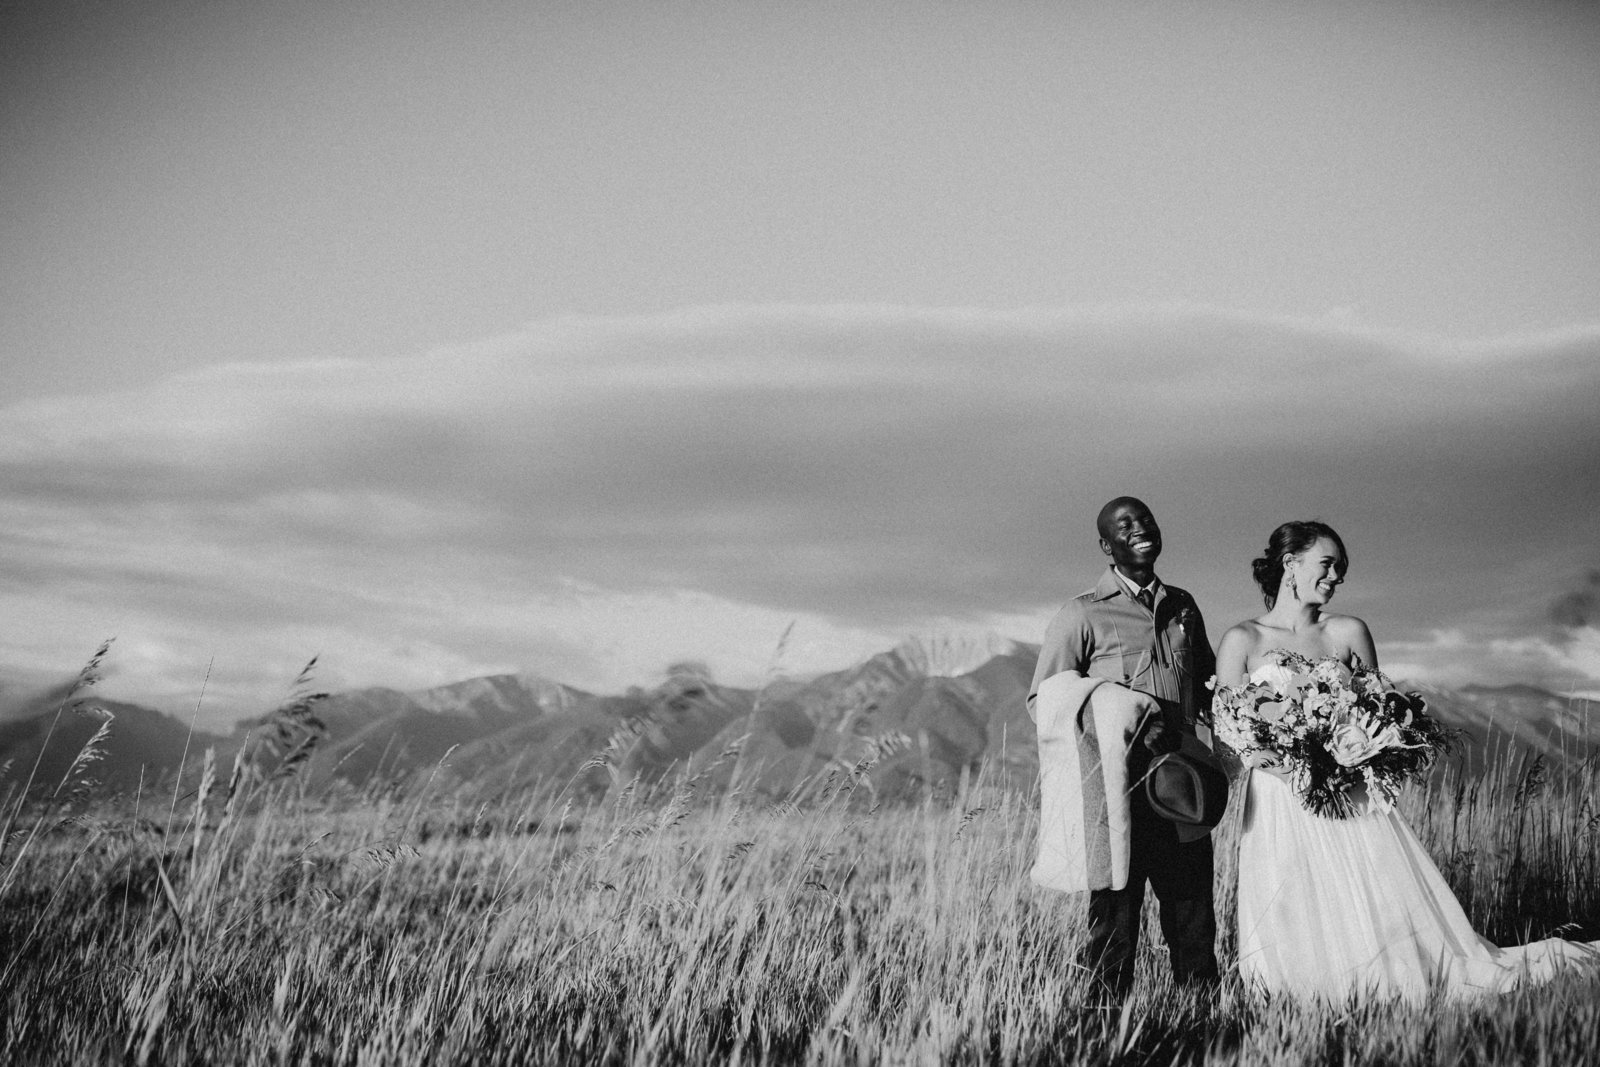 Models photographed for a boho styled wedding shoot in Montana, photographed by Sweetwater.